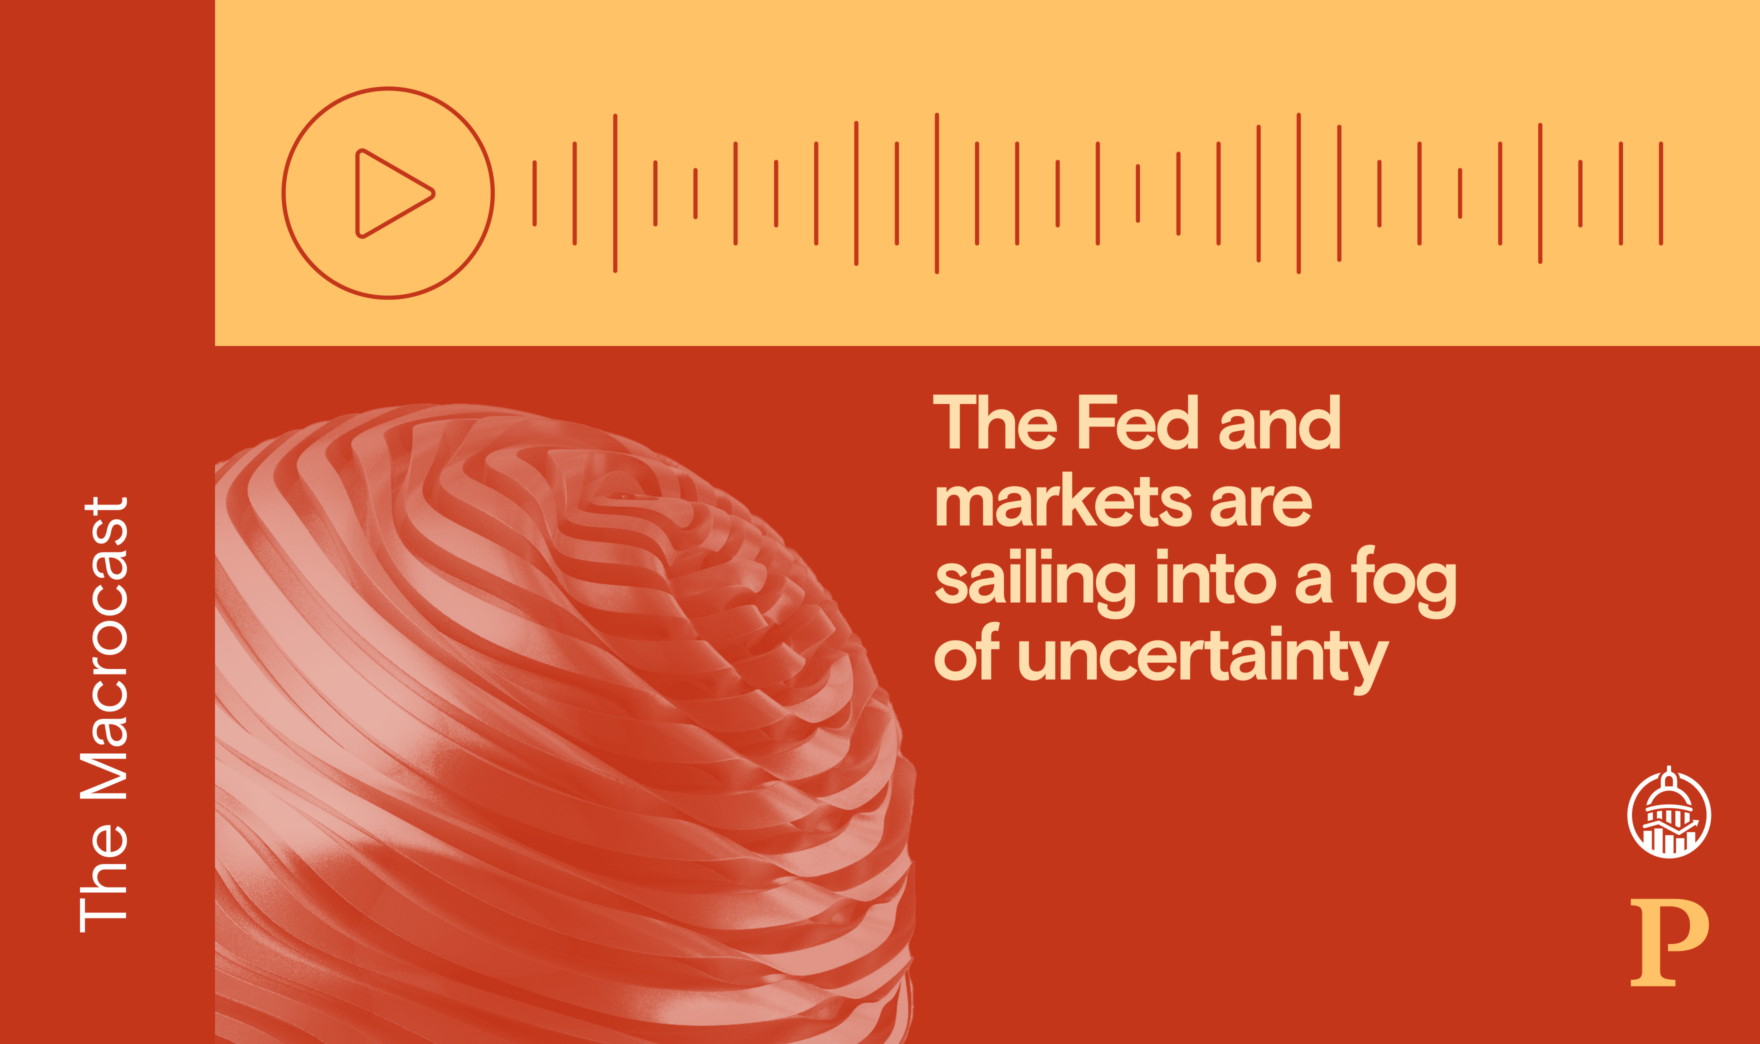 Macrocast: The Fed and markets are sailing into a fog of uncertainty